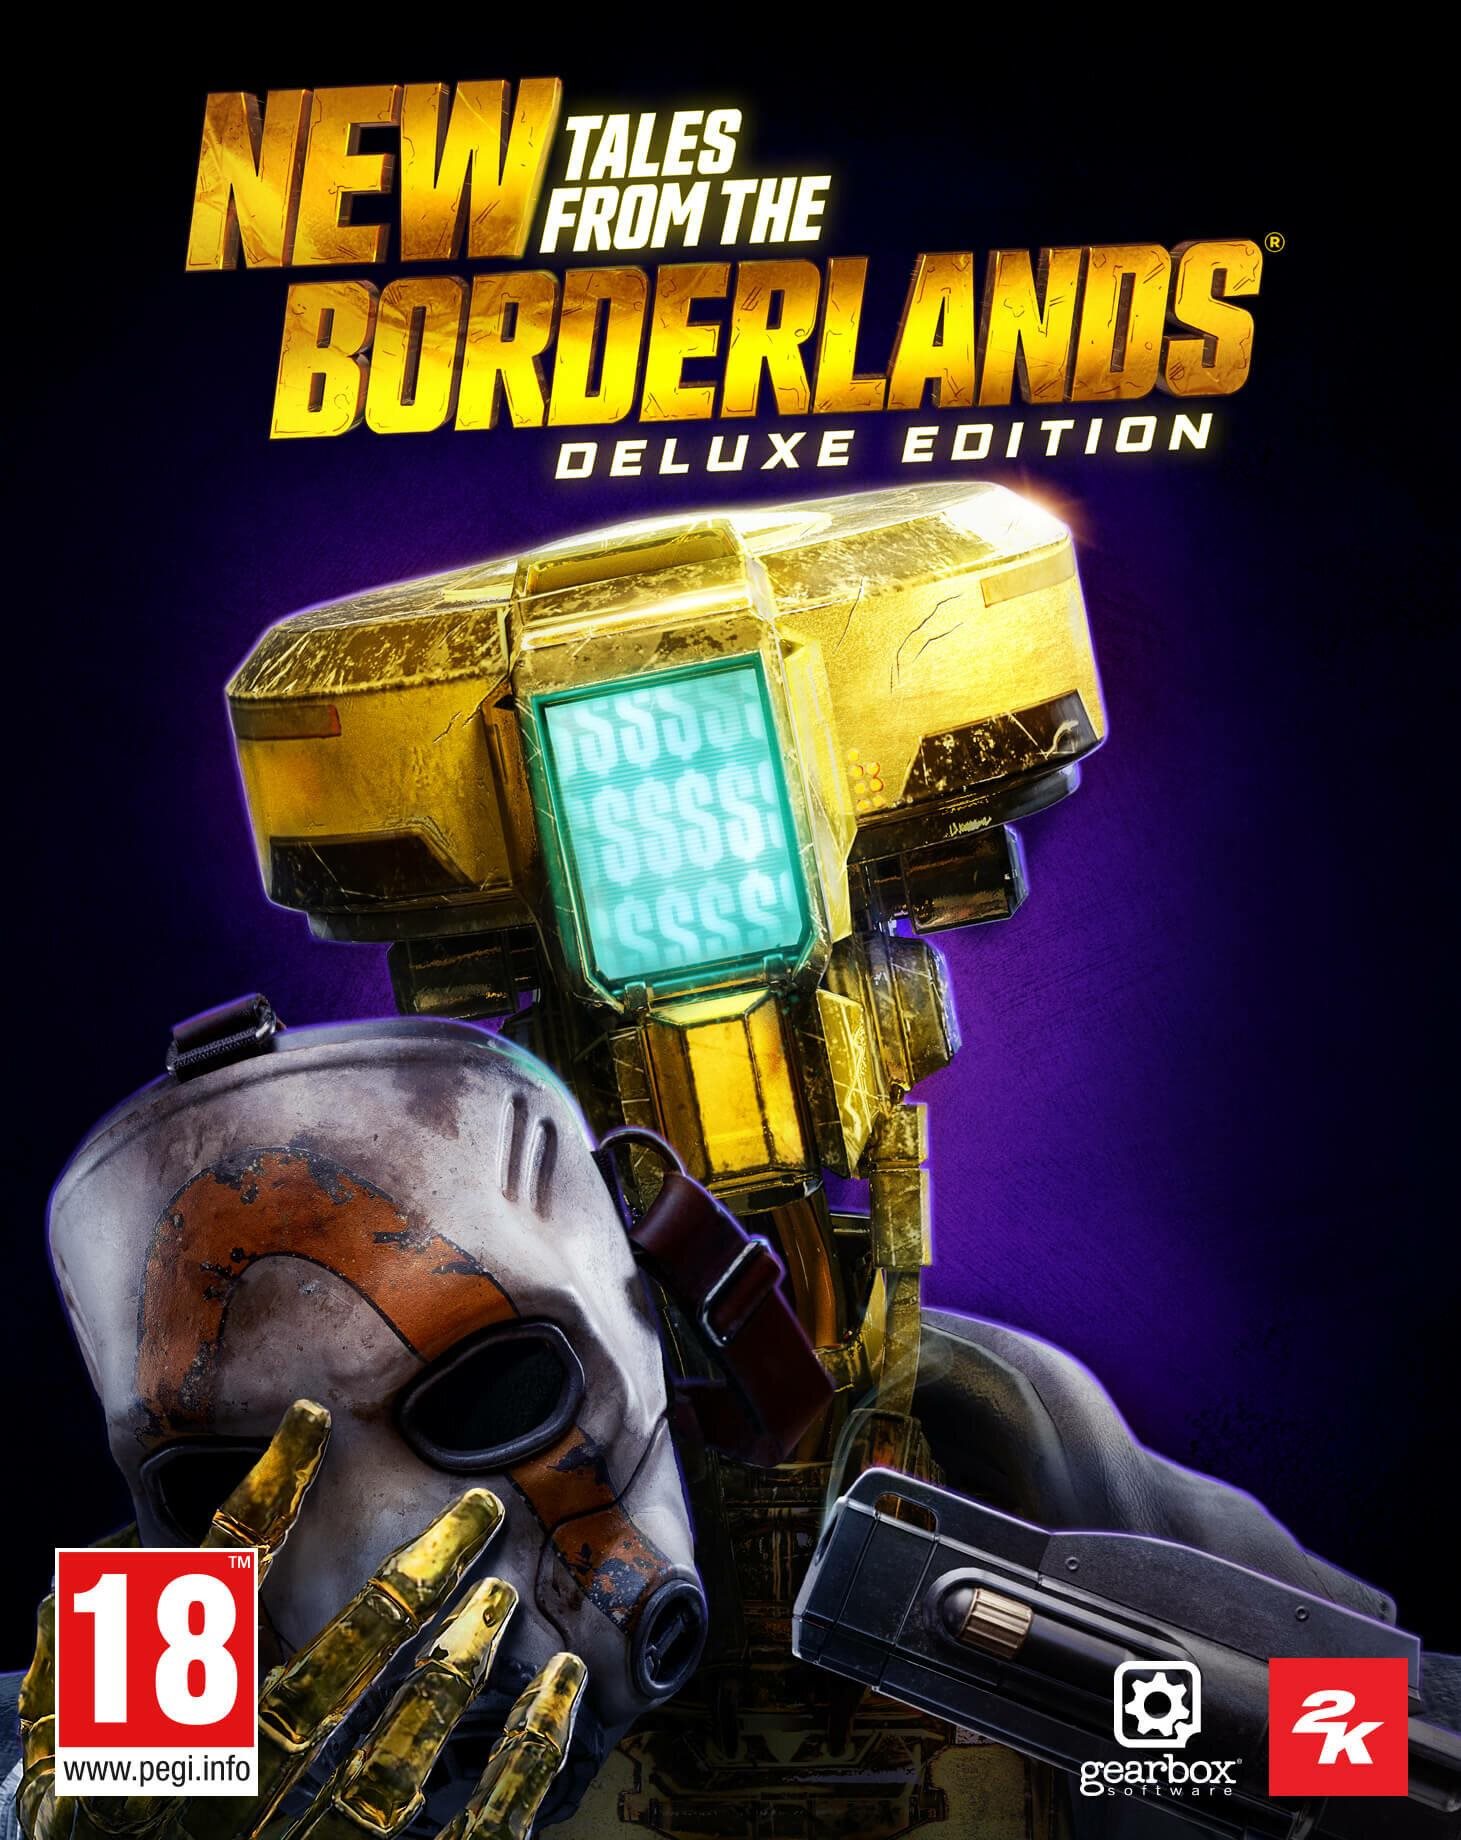 New Tales from the Borderlands Deluxe Edition - PC DIGITAL